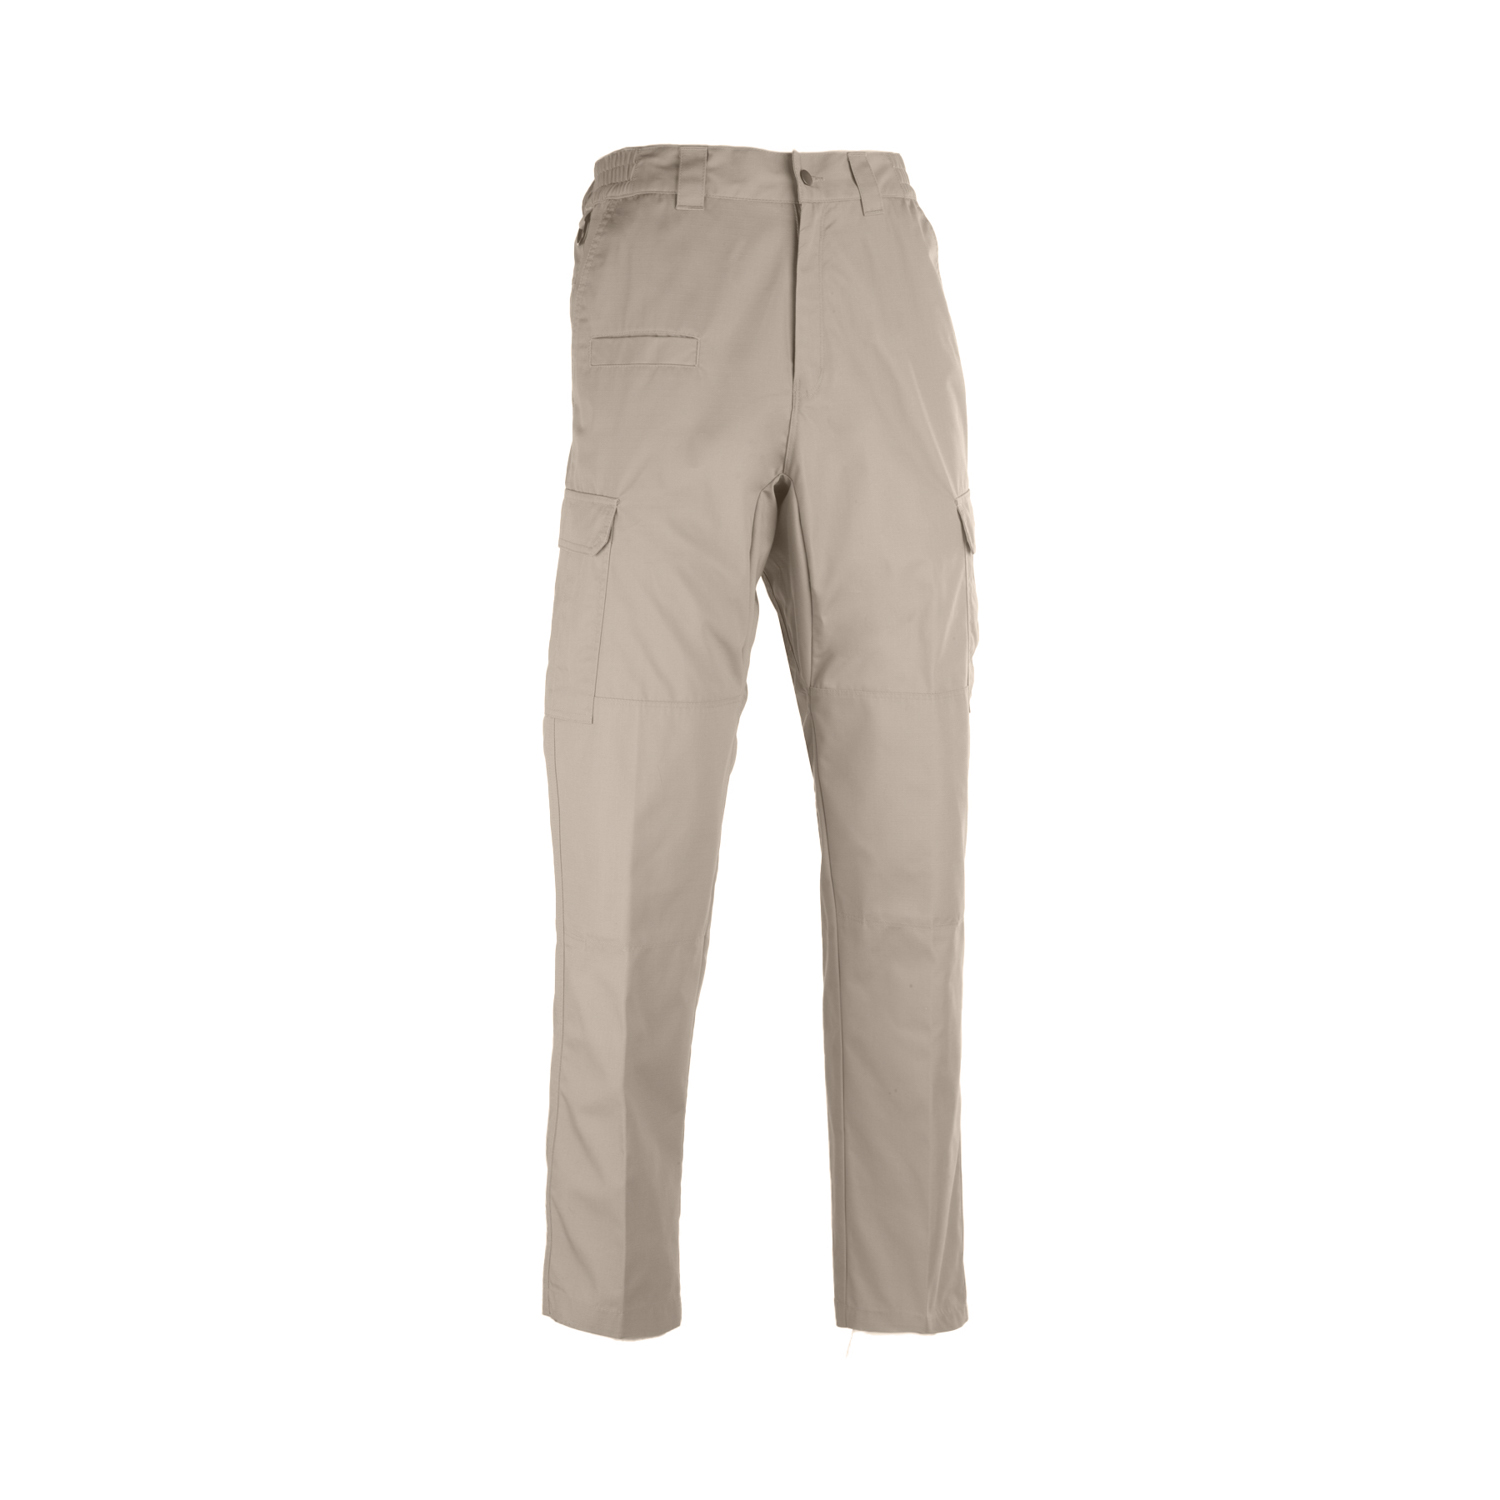 Under Armour Women's UA NWT $80 Tactical Patrol Pants 1254097 220 Coyote  Brown